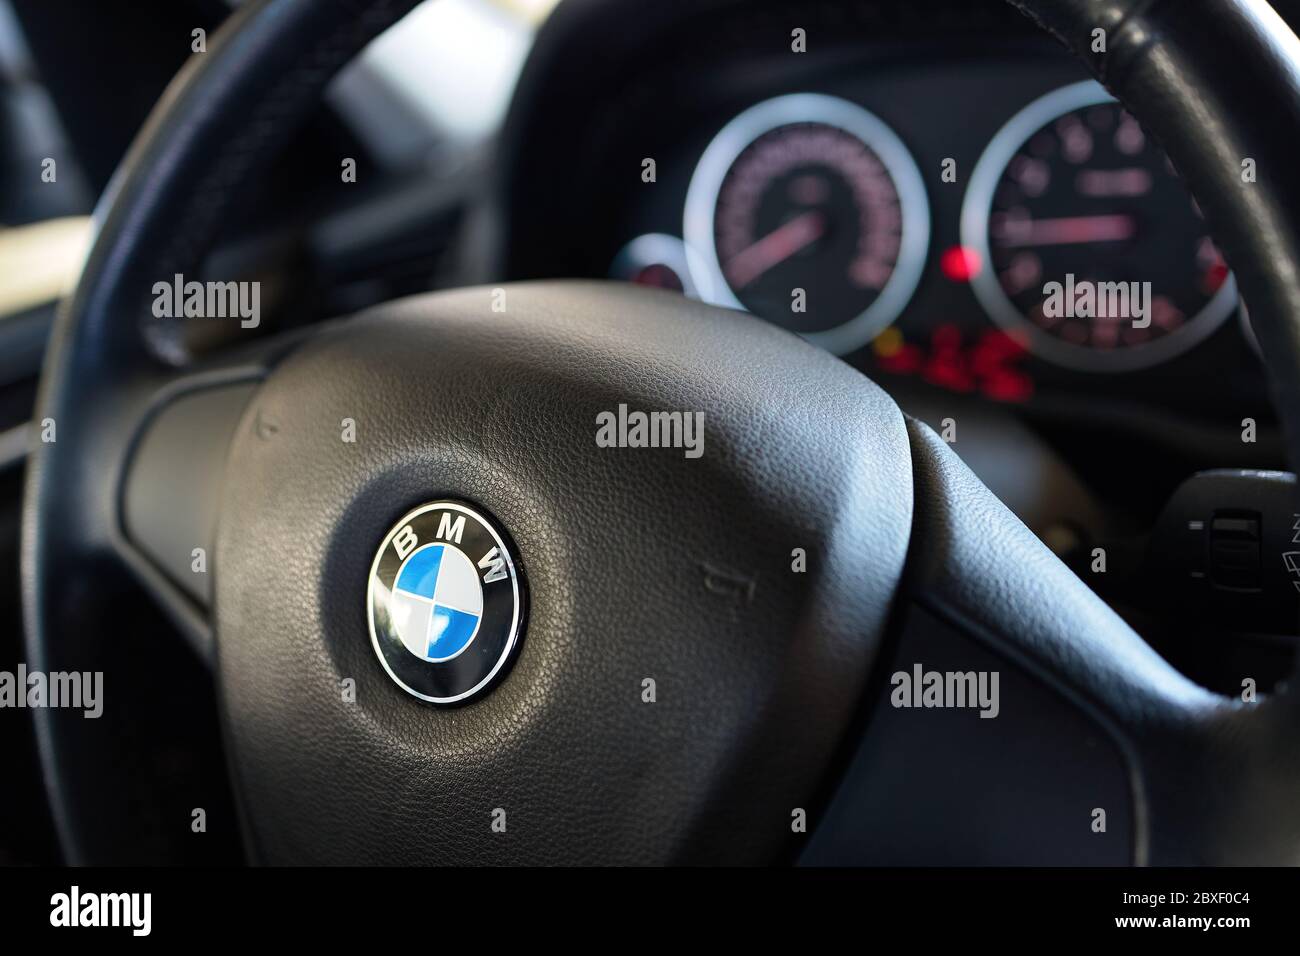 GRODNO, BELARUS - JUNE 2020: BMW X3 II F25 2.0i xDrive steering wheel with airbag and BMW logo with electronic dashboard, out of focus. Stock Photo